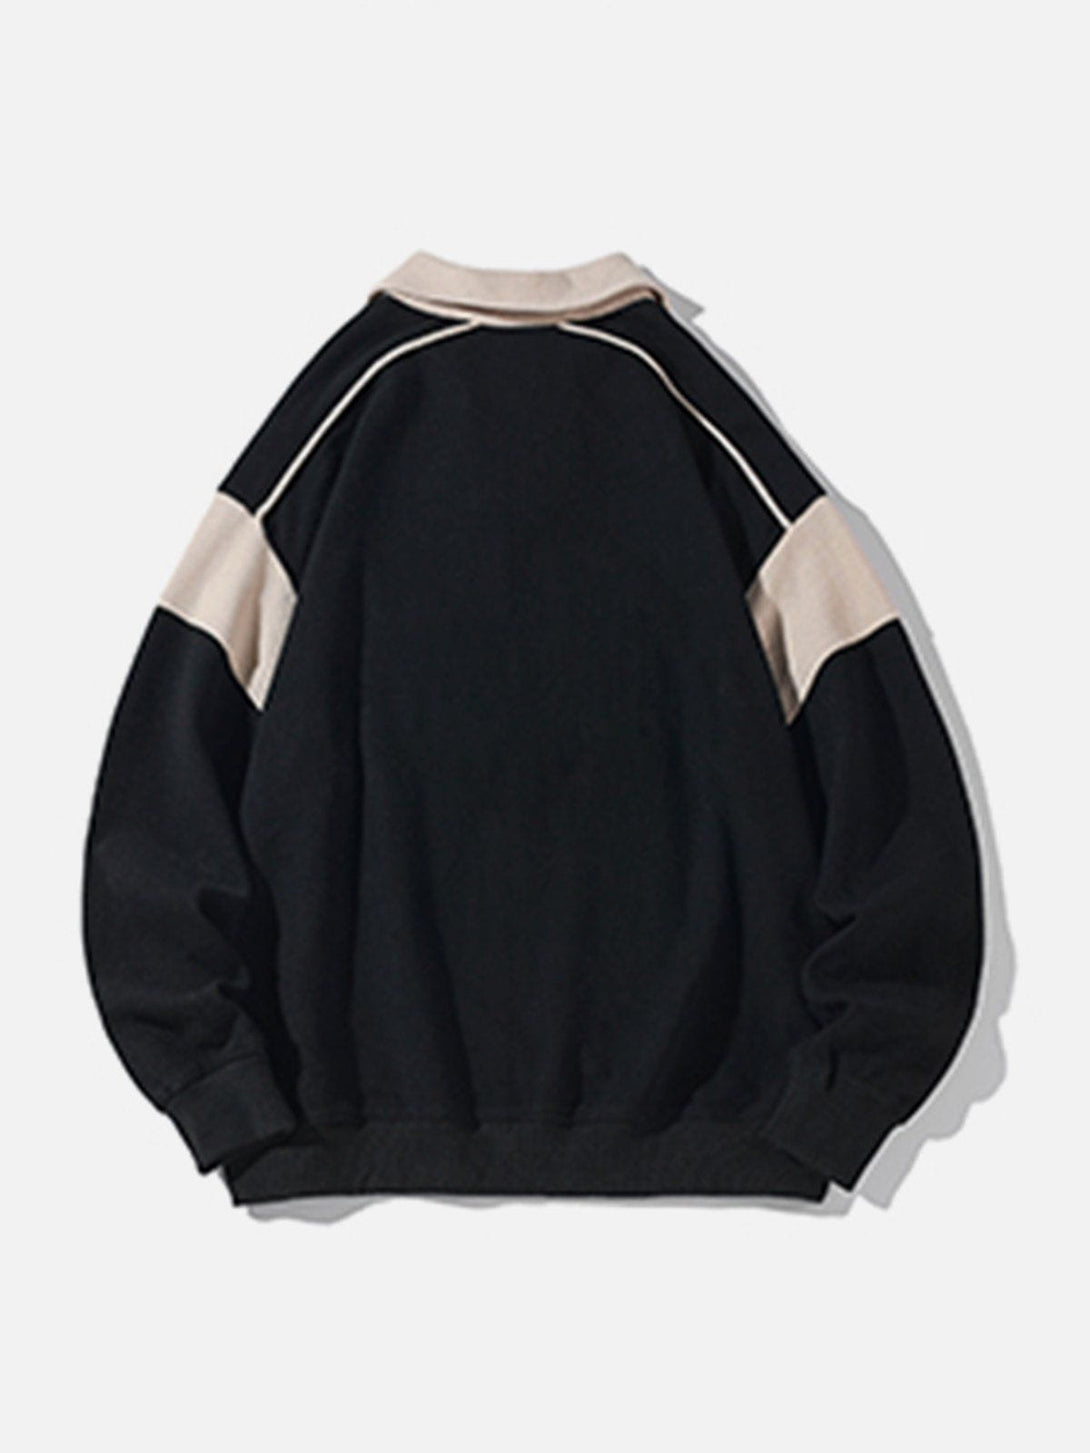 Levefly - Embroidery Lettered Sweatshirt - Streetwear Fashion - levefly.com